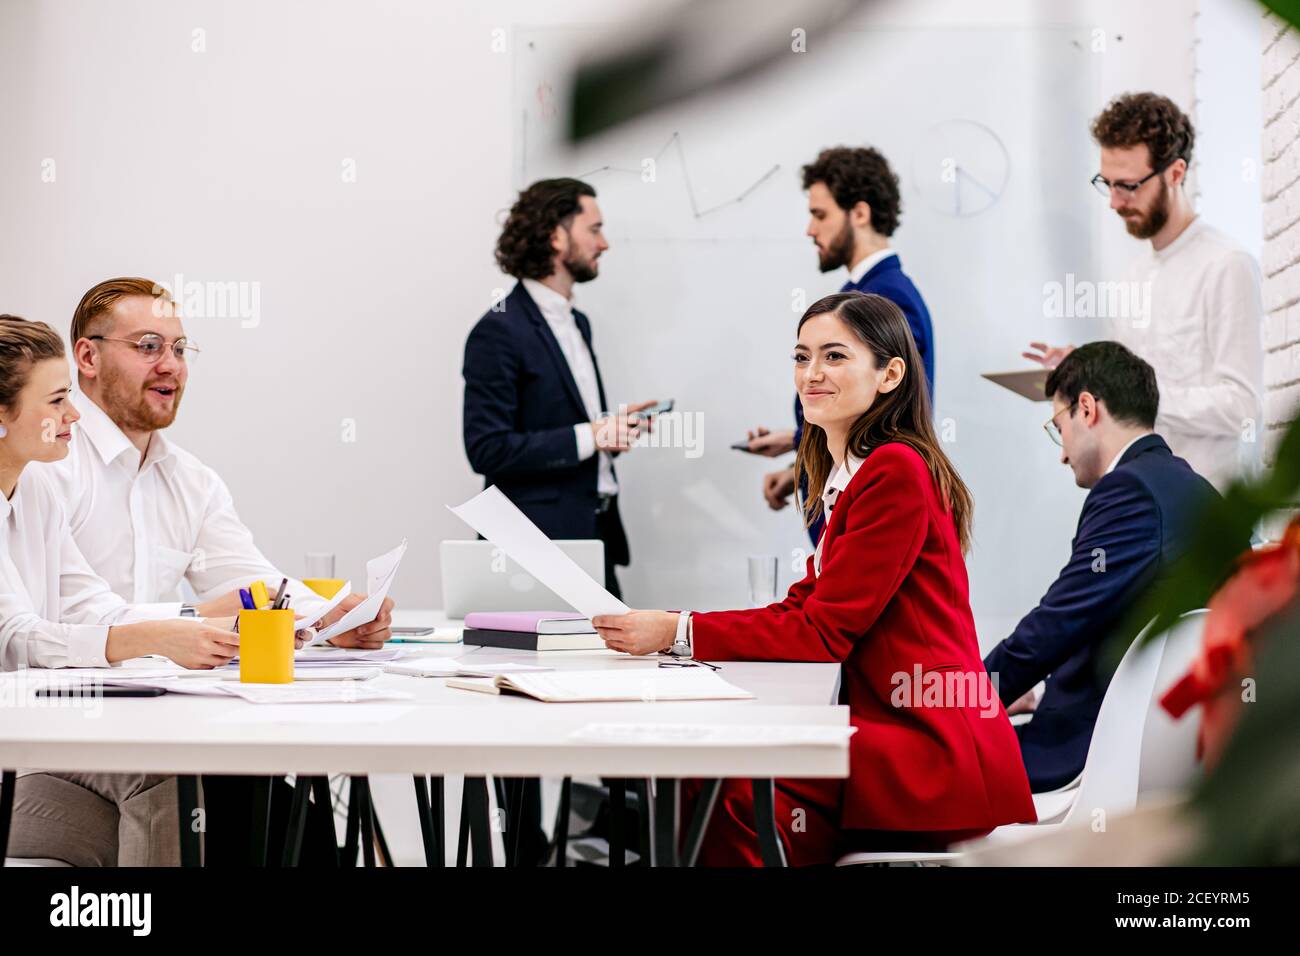 young caucasian business team co-working in office, friendly crew consisted of young enthusiastic people gathered to discuss business ideas Stock Photo